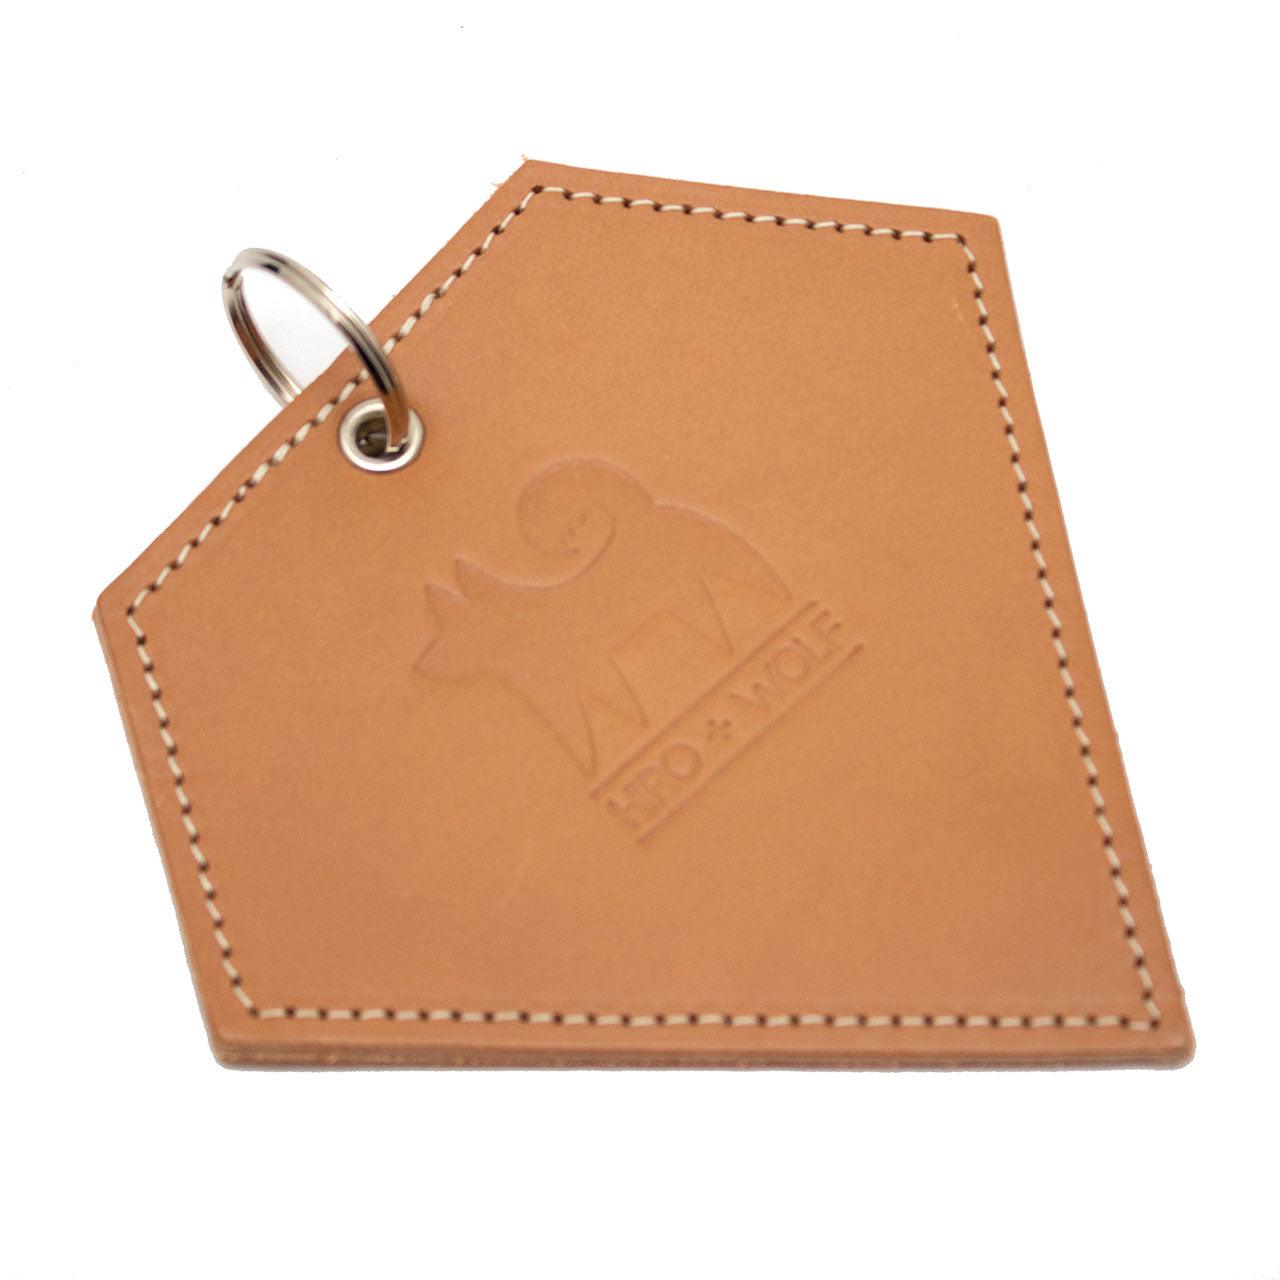 Poo Pouch Diamond 'Tan Leather'-Poo Pouch-Hiro + Wolf